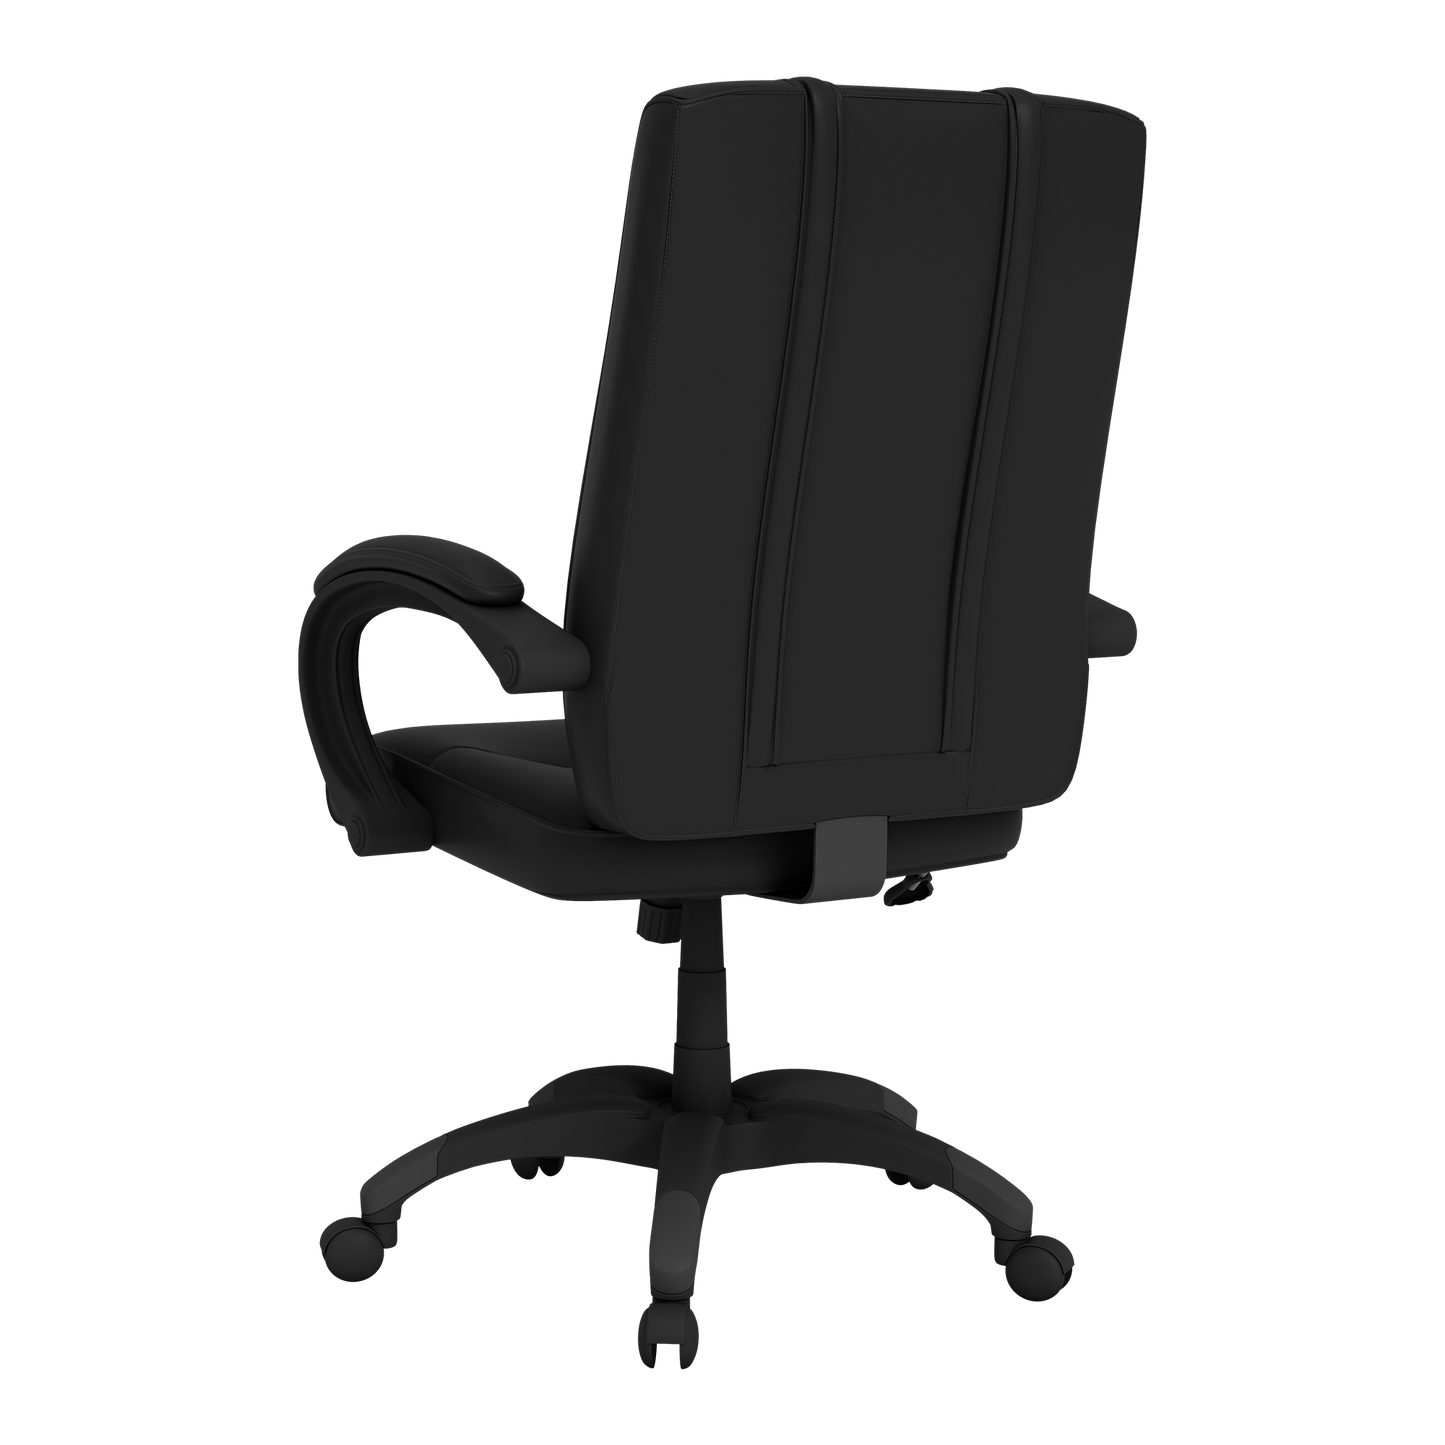 Office Chair 1000 with Seattle Kraken Secondary Logo